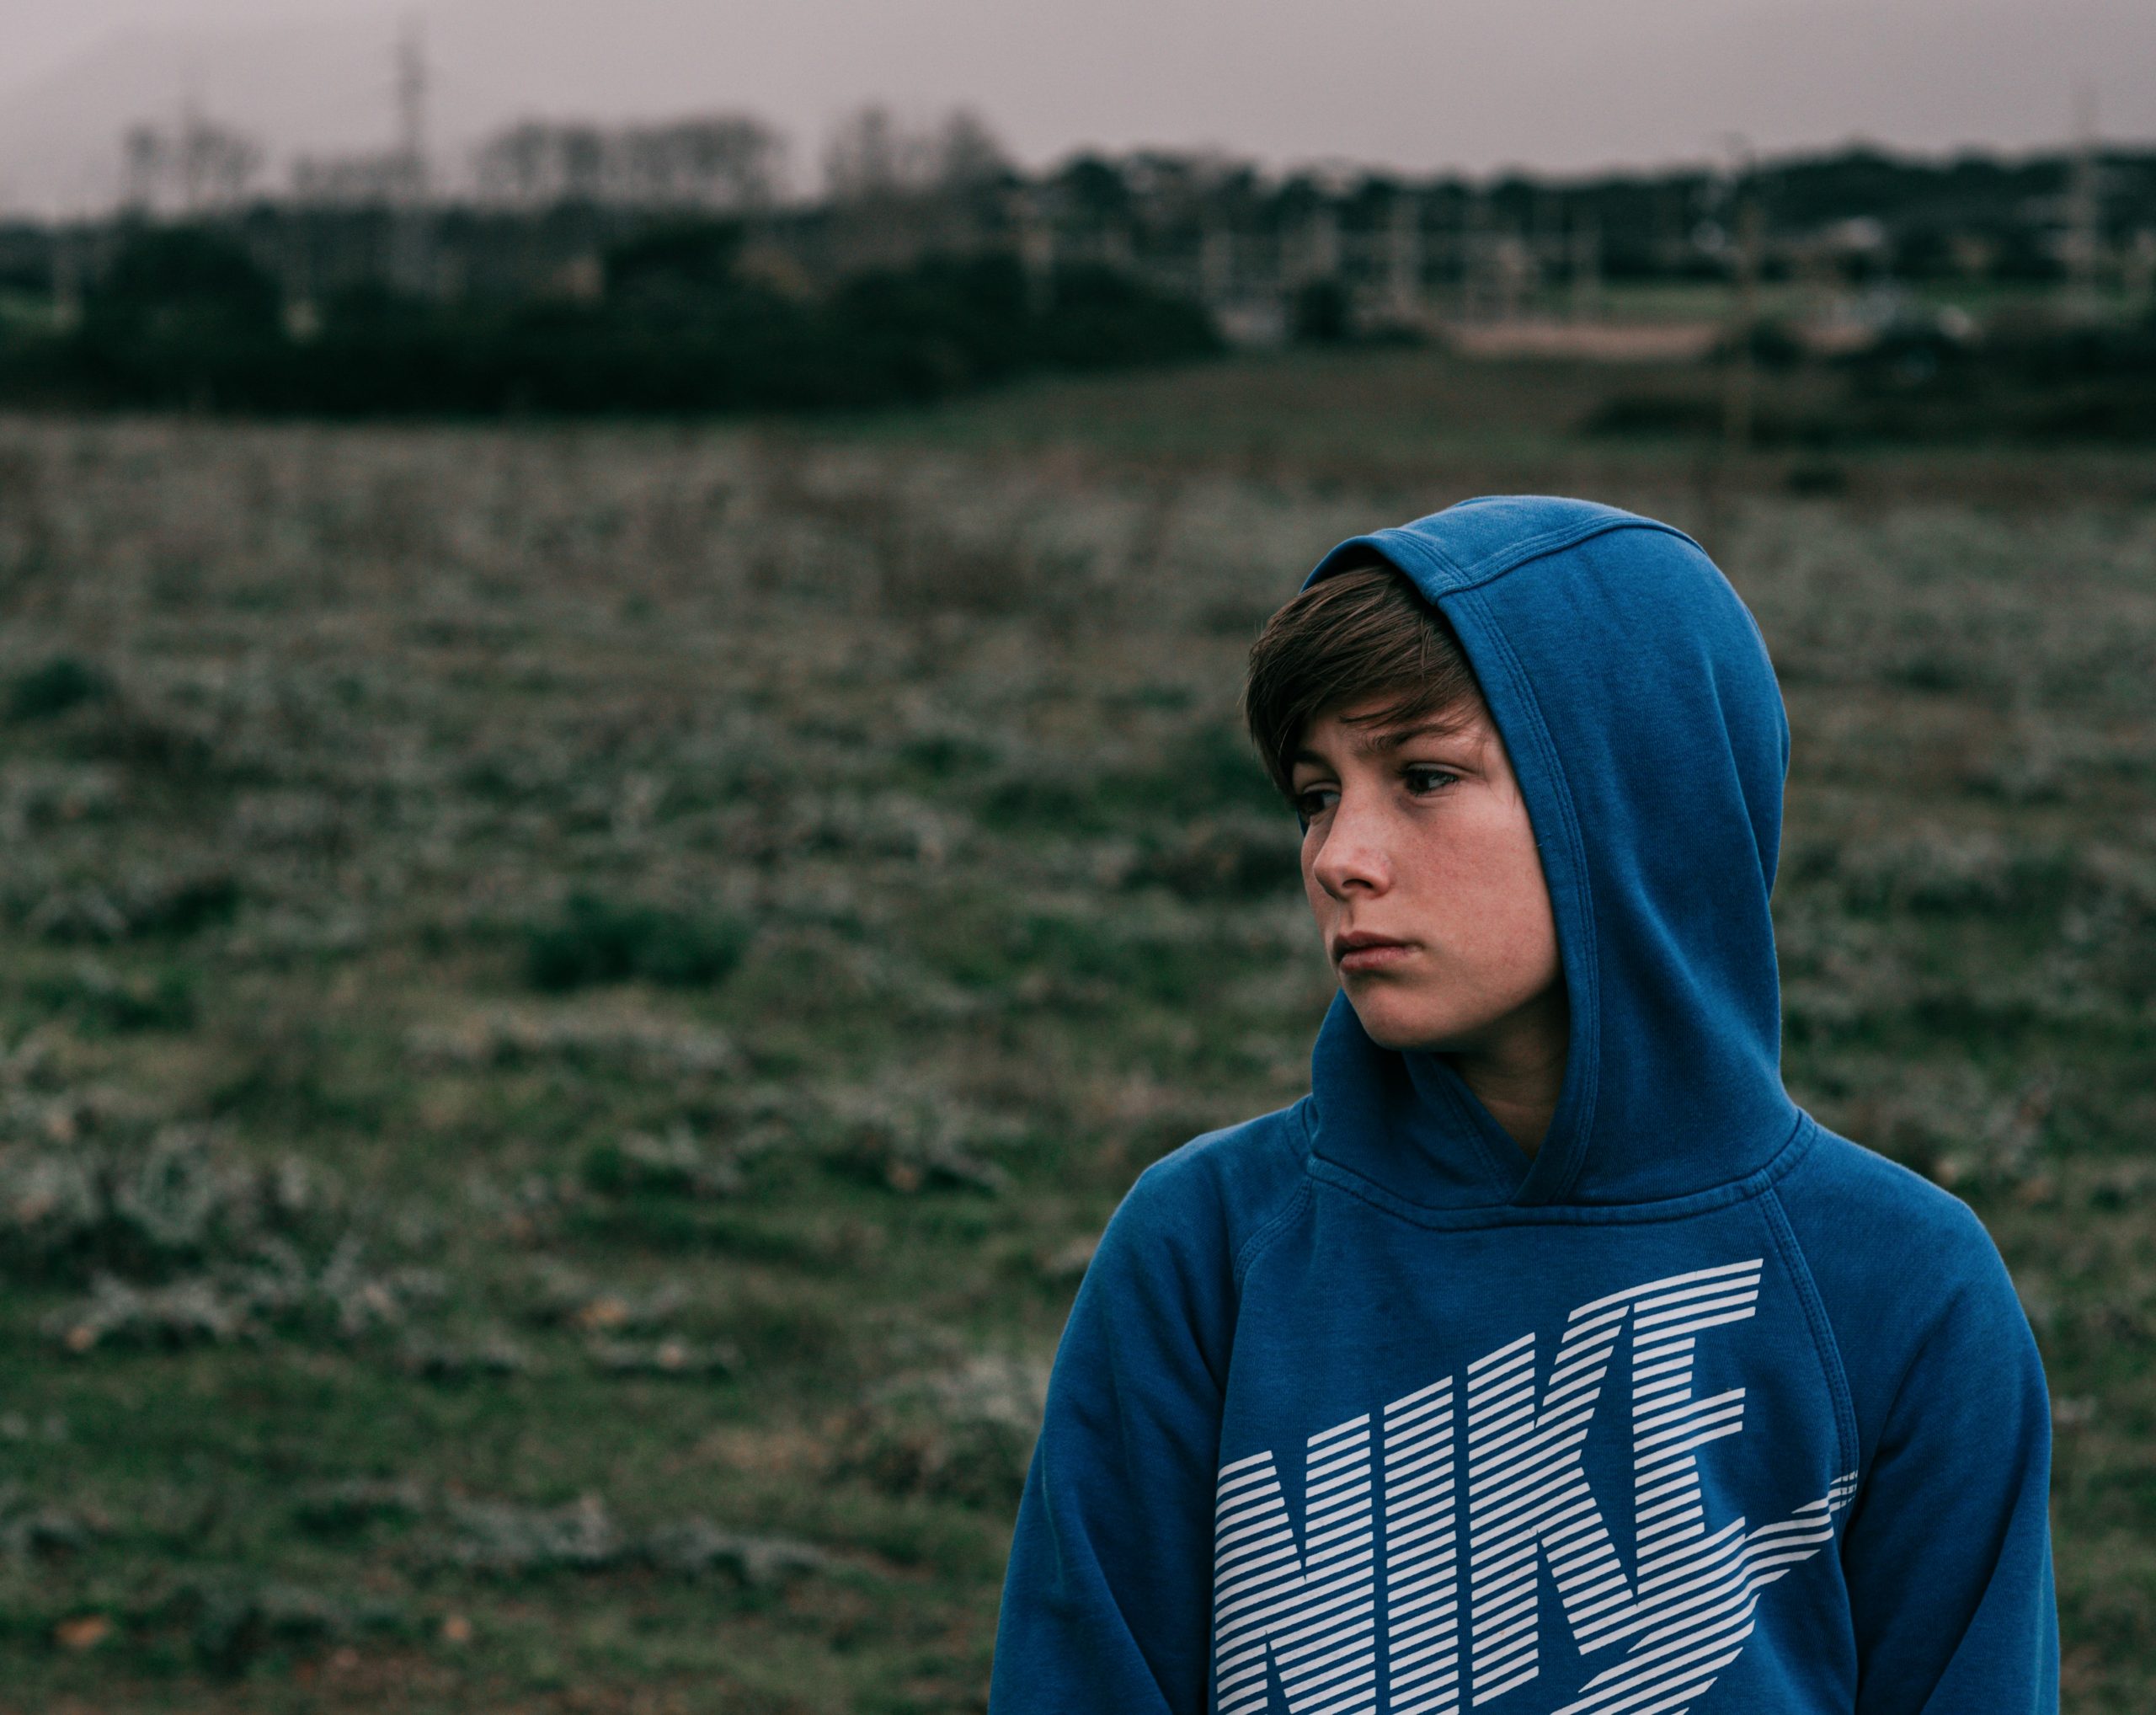 A young boy wearing a Nike hoodie in blue looks sad. He stands against a background of a green field at lowlight